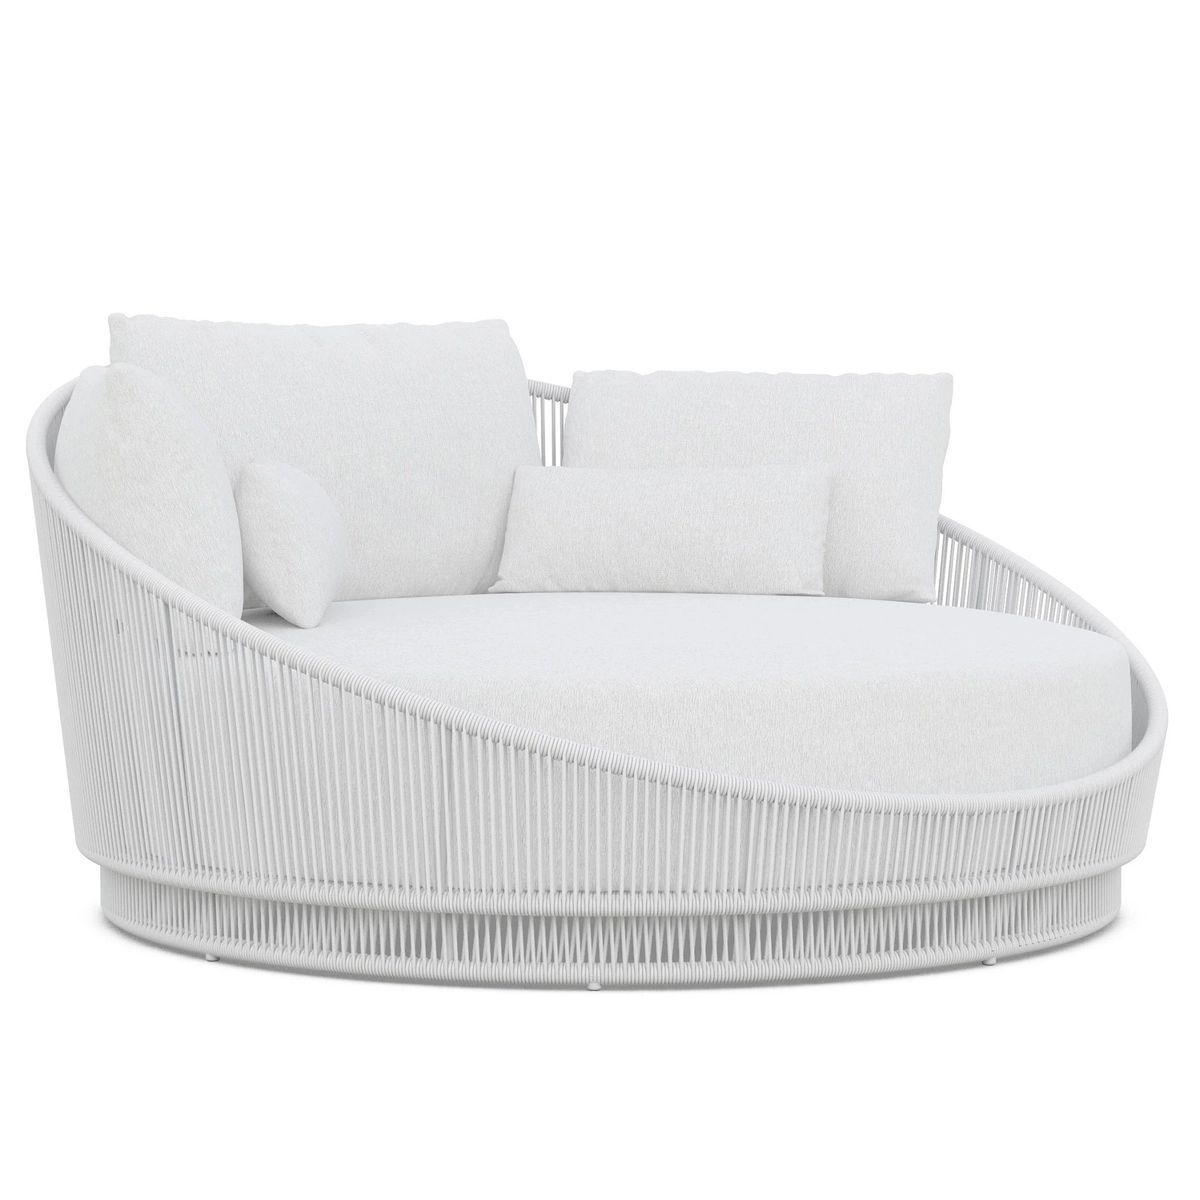 Shoreline White Outdoor Day Bed | Annie Selke